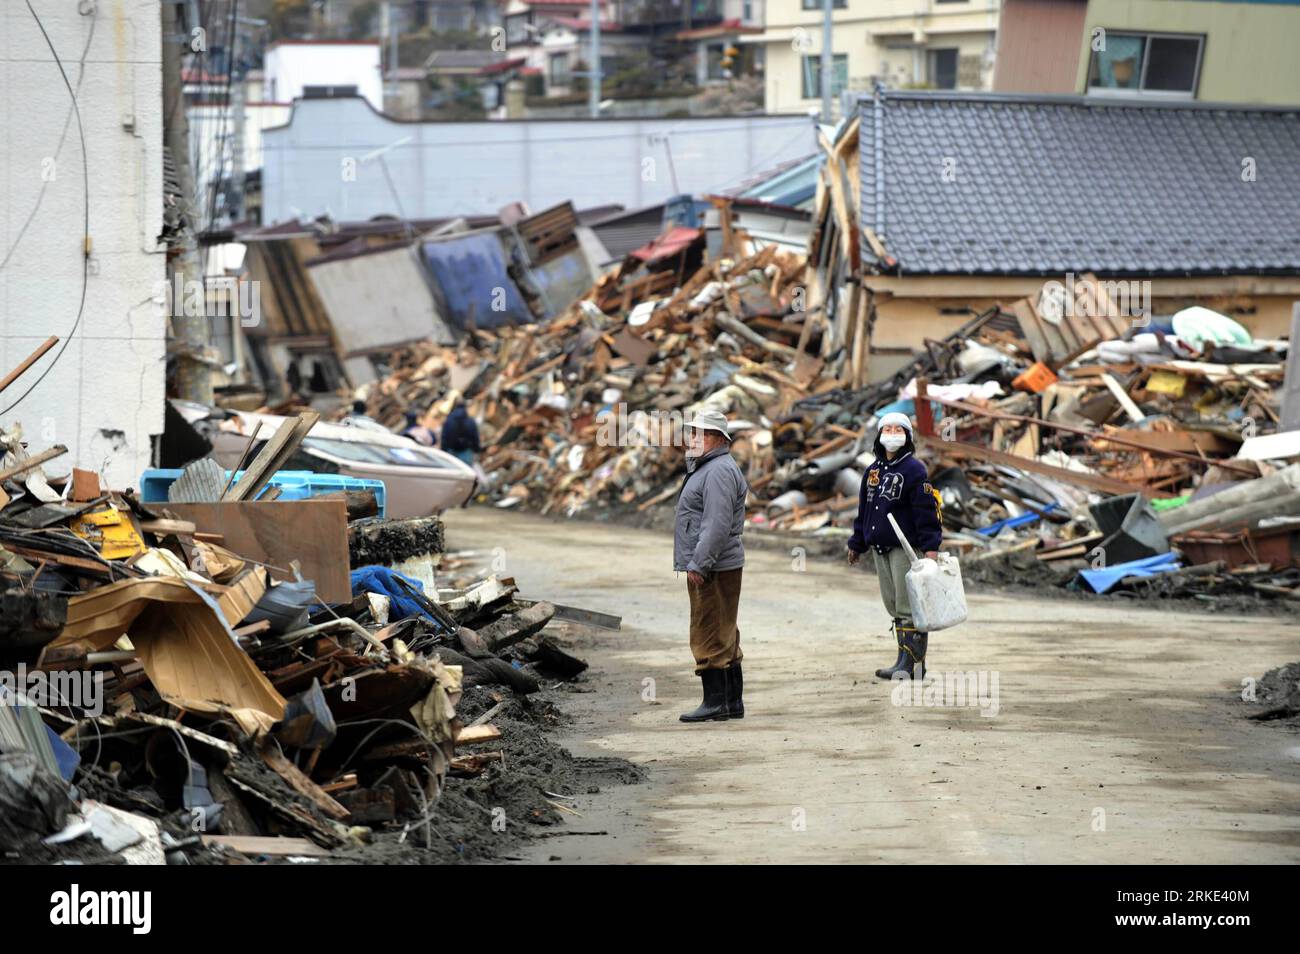 Bildnummer: 55049015  Datum: 21.03.2011  Copyright: imago/Xinhua (110321) -- MIYAGI-KEN, March 21, 2011 (Xinhua) -- Two walk among building debris in Kesennuma, Miyagi-ken in Japan, March 21, 2011. Japan s recent earthquake and tsunami would cause up to 235 billion U.S. dollars in damage and a temporary impact on the economic growth of Japan and the region, but the growth will pick up after mid-2011 as reconstruction efforts get underway, the World Bank said in a report on Monday. (Xinhua/Song Zhenping) (lmz) JAPAN-MIYAGI-KEN-QUAKE PUBLICATIONxNOTxINxCHN Gesellschaft Japan Naturkatastrophe Erd Stock Photo